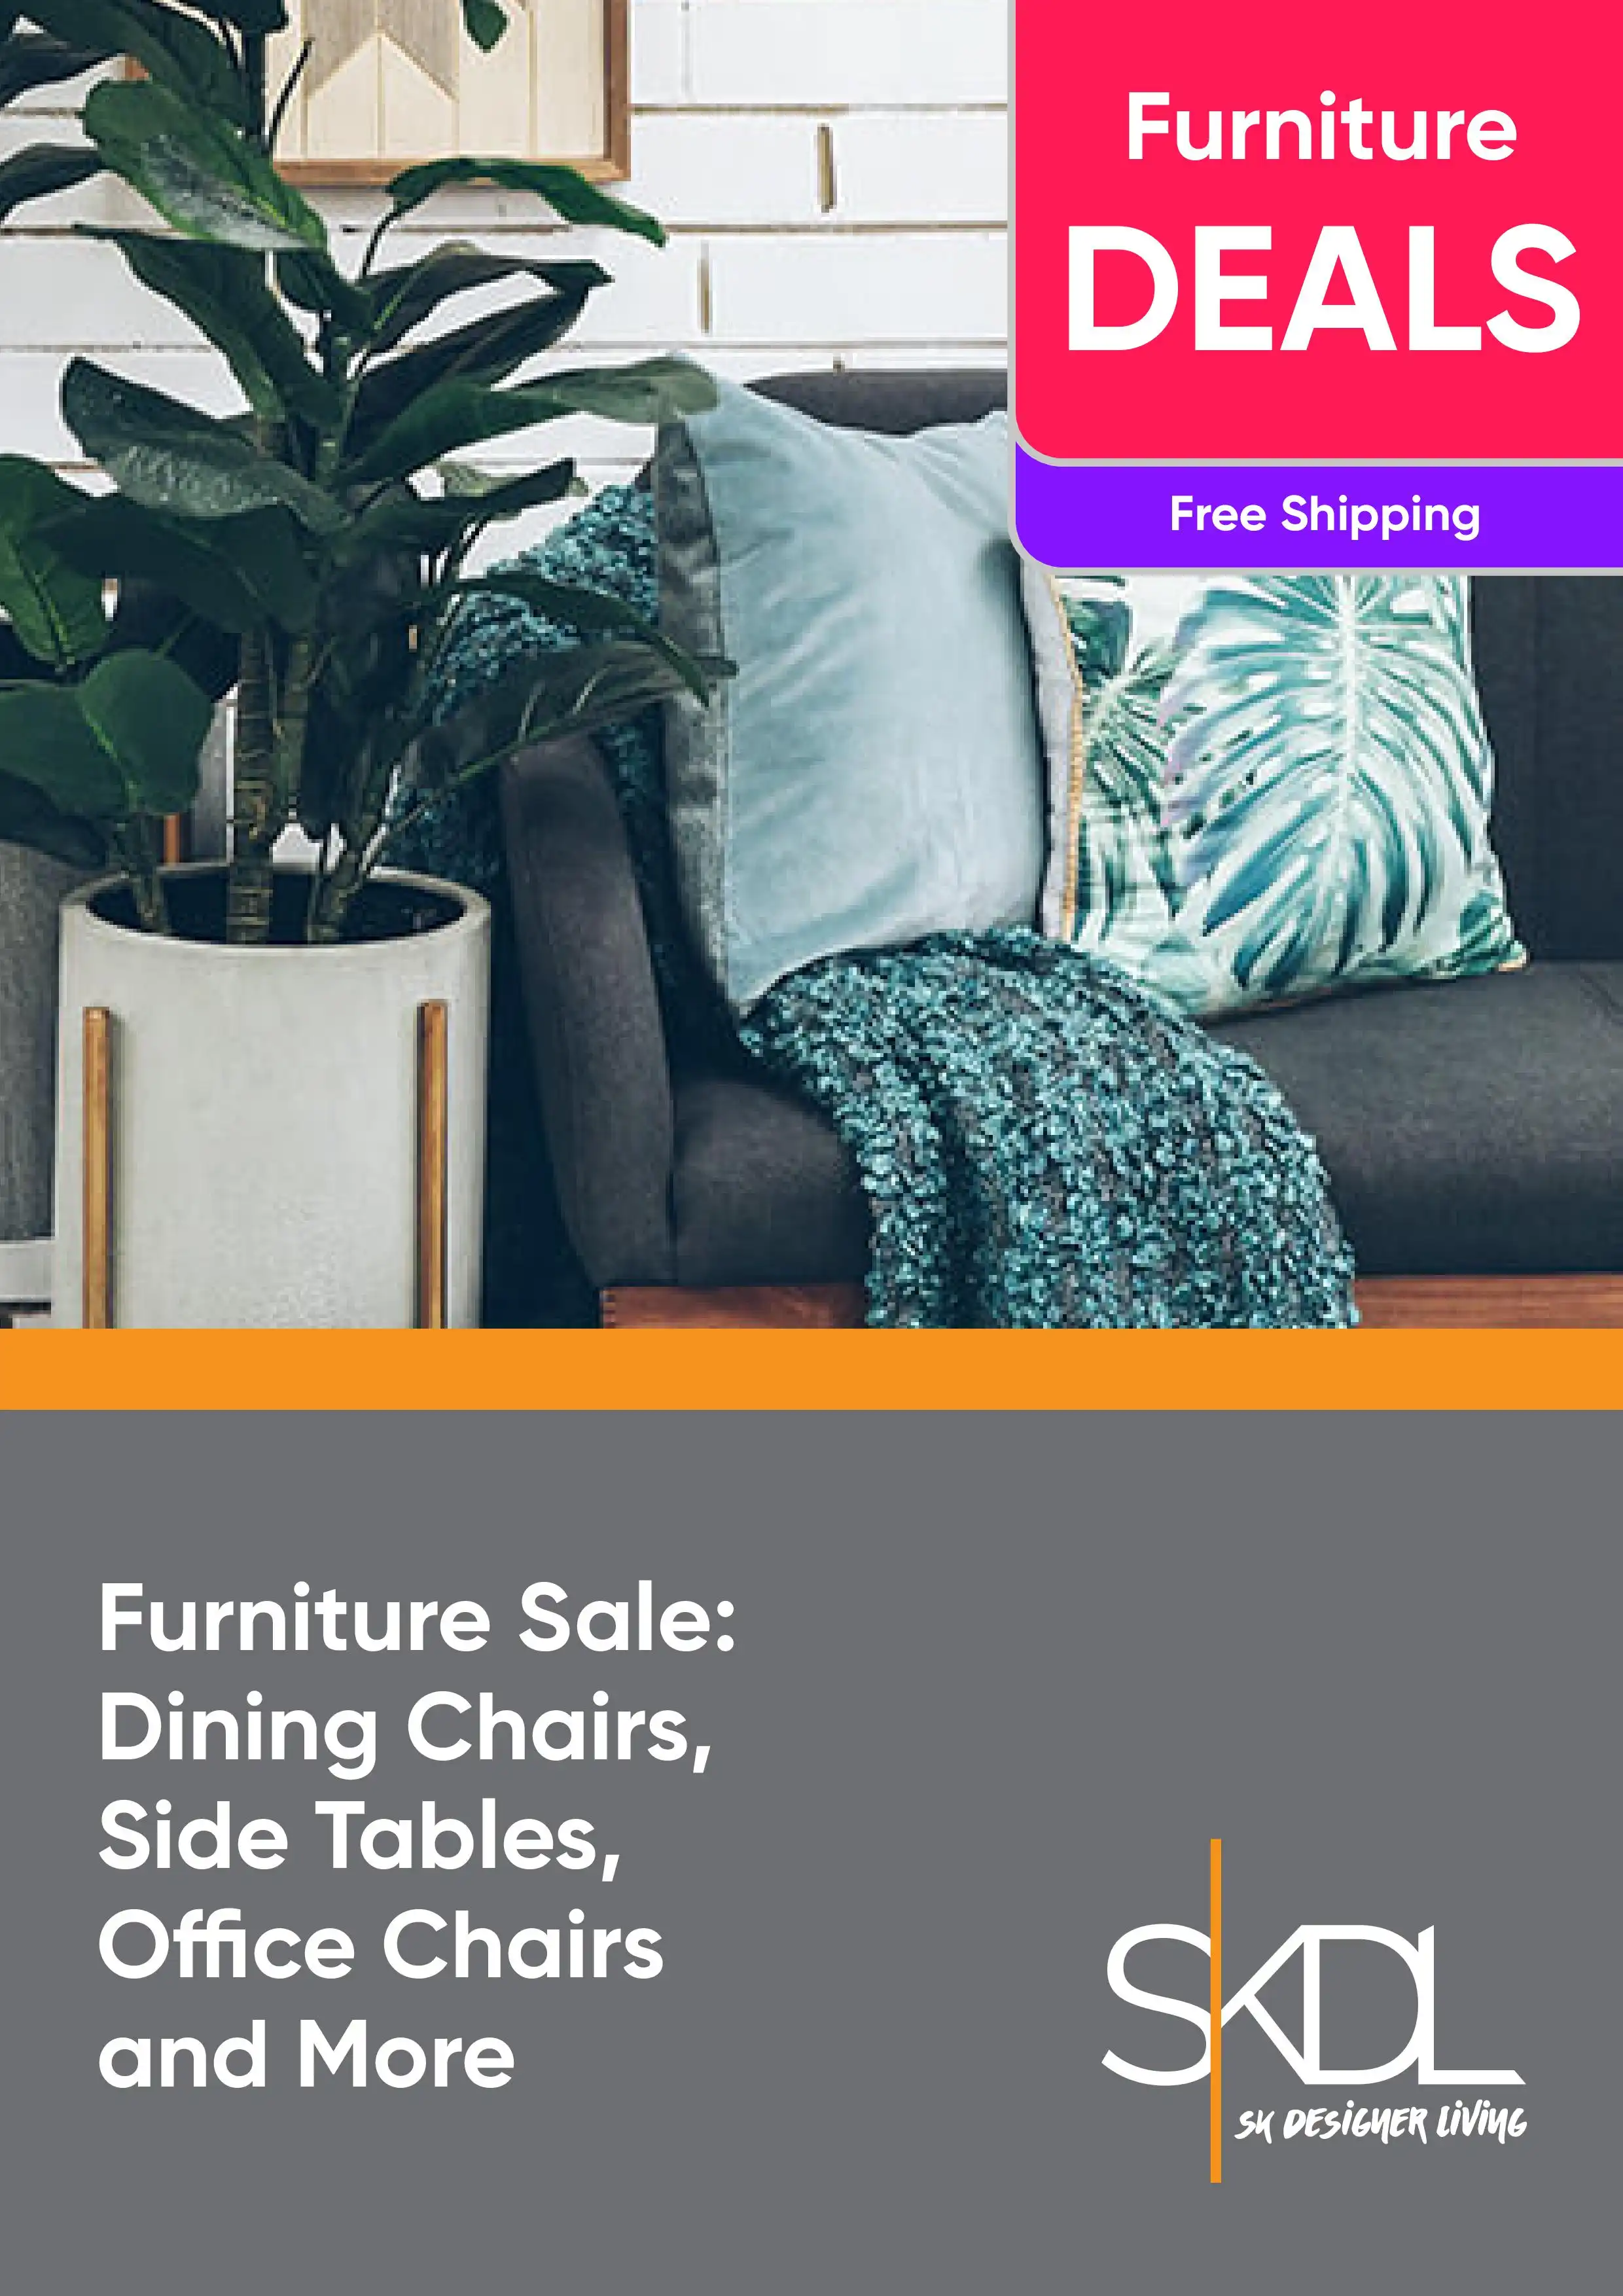 Furniture Sale: Dining Chairs, Side Tables, Office Chairs and More - Free Shipping